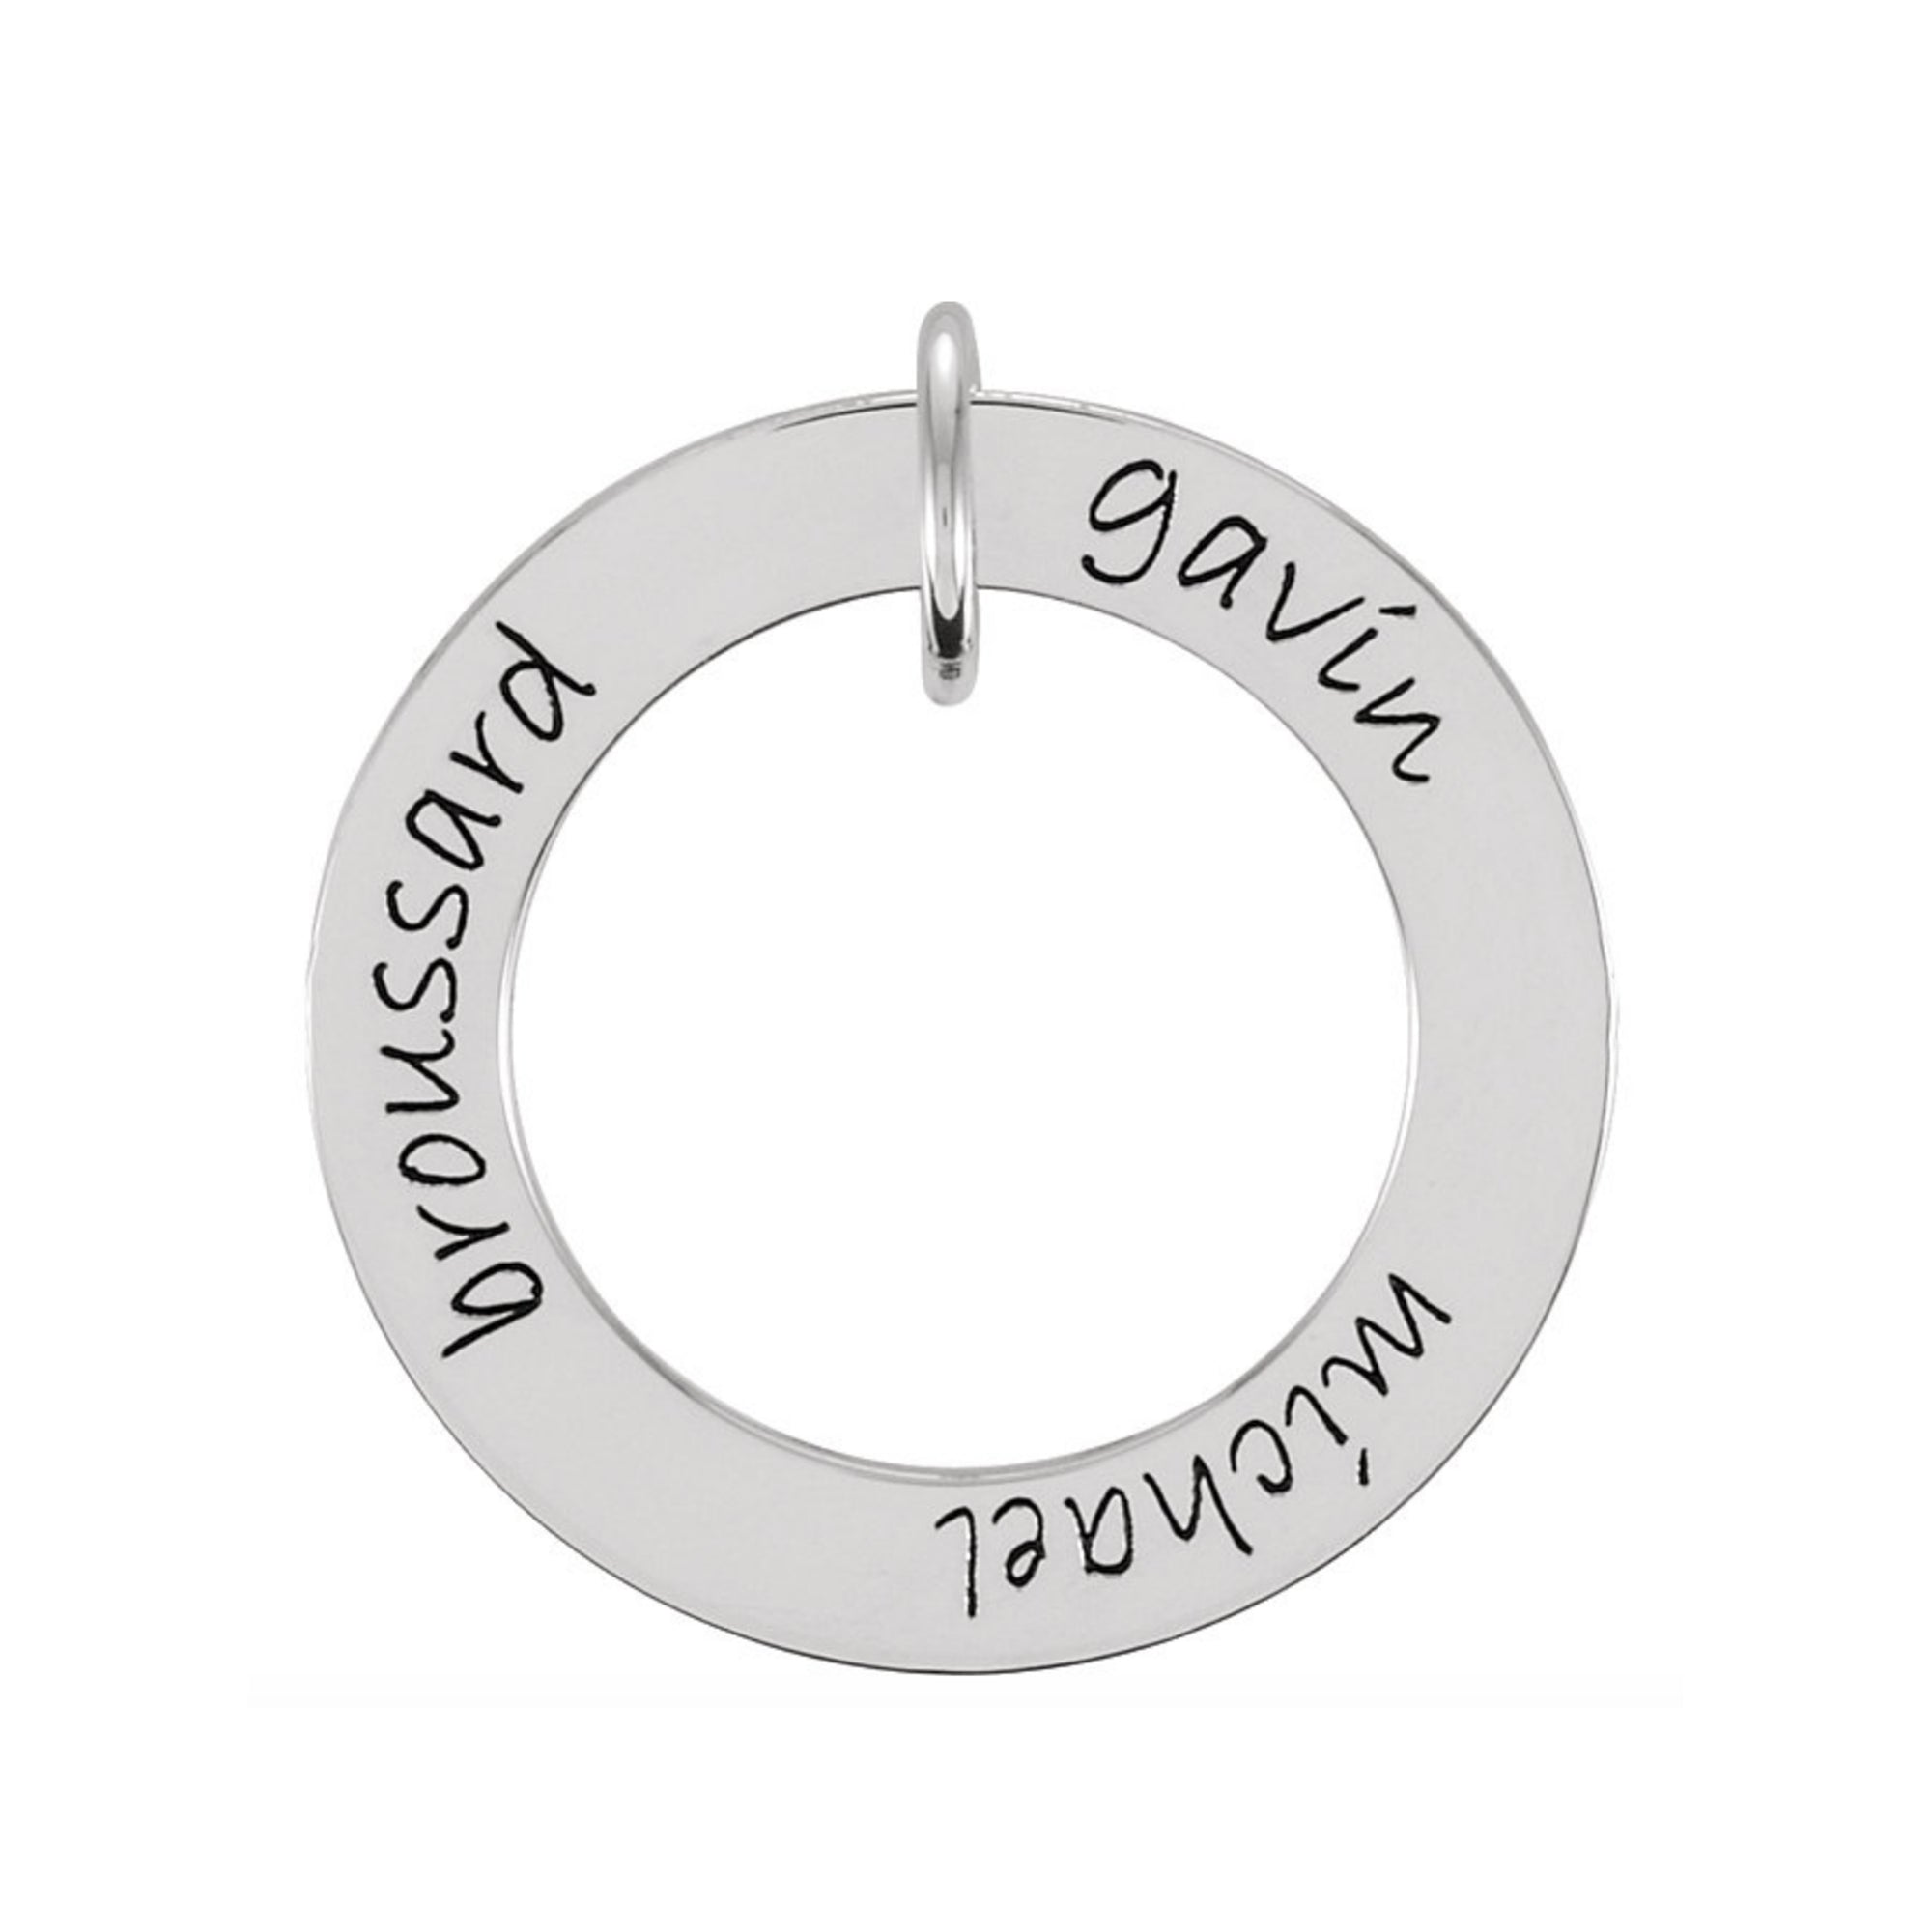 Custom Engravable Open Circle Necklace in White, Yellow or Rose Gold - Talisman Collection Fine Jewelers